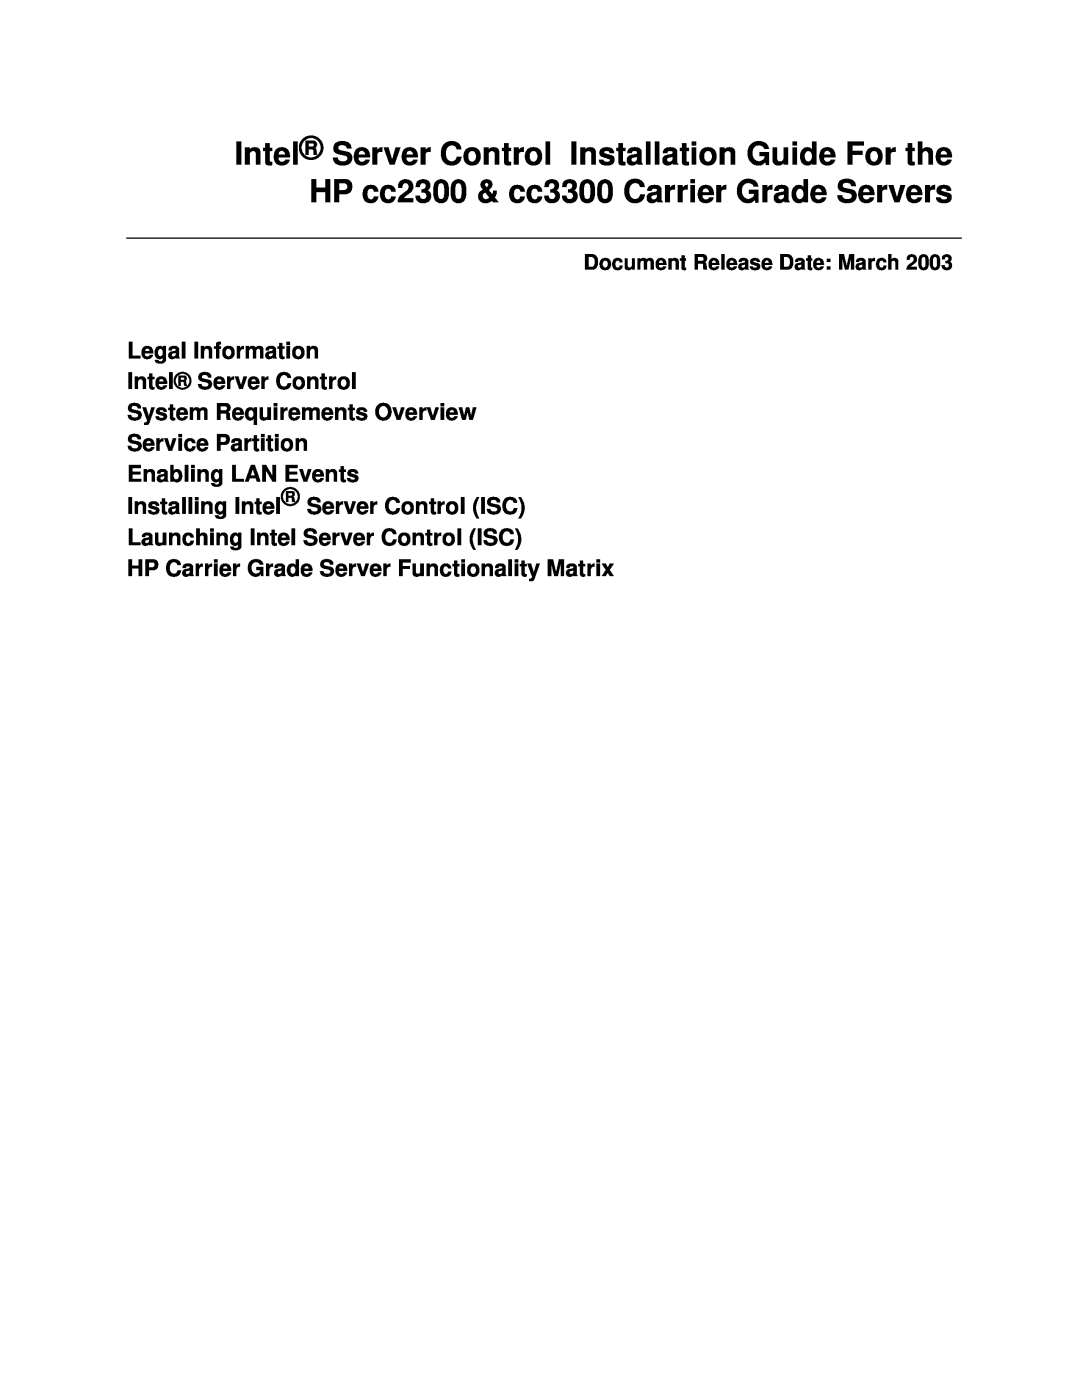 Intel cc2300, cc3300 manual Legal Information Intel Server Control, System Requirements Overview Service Partition 